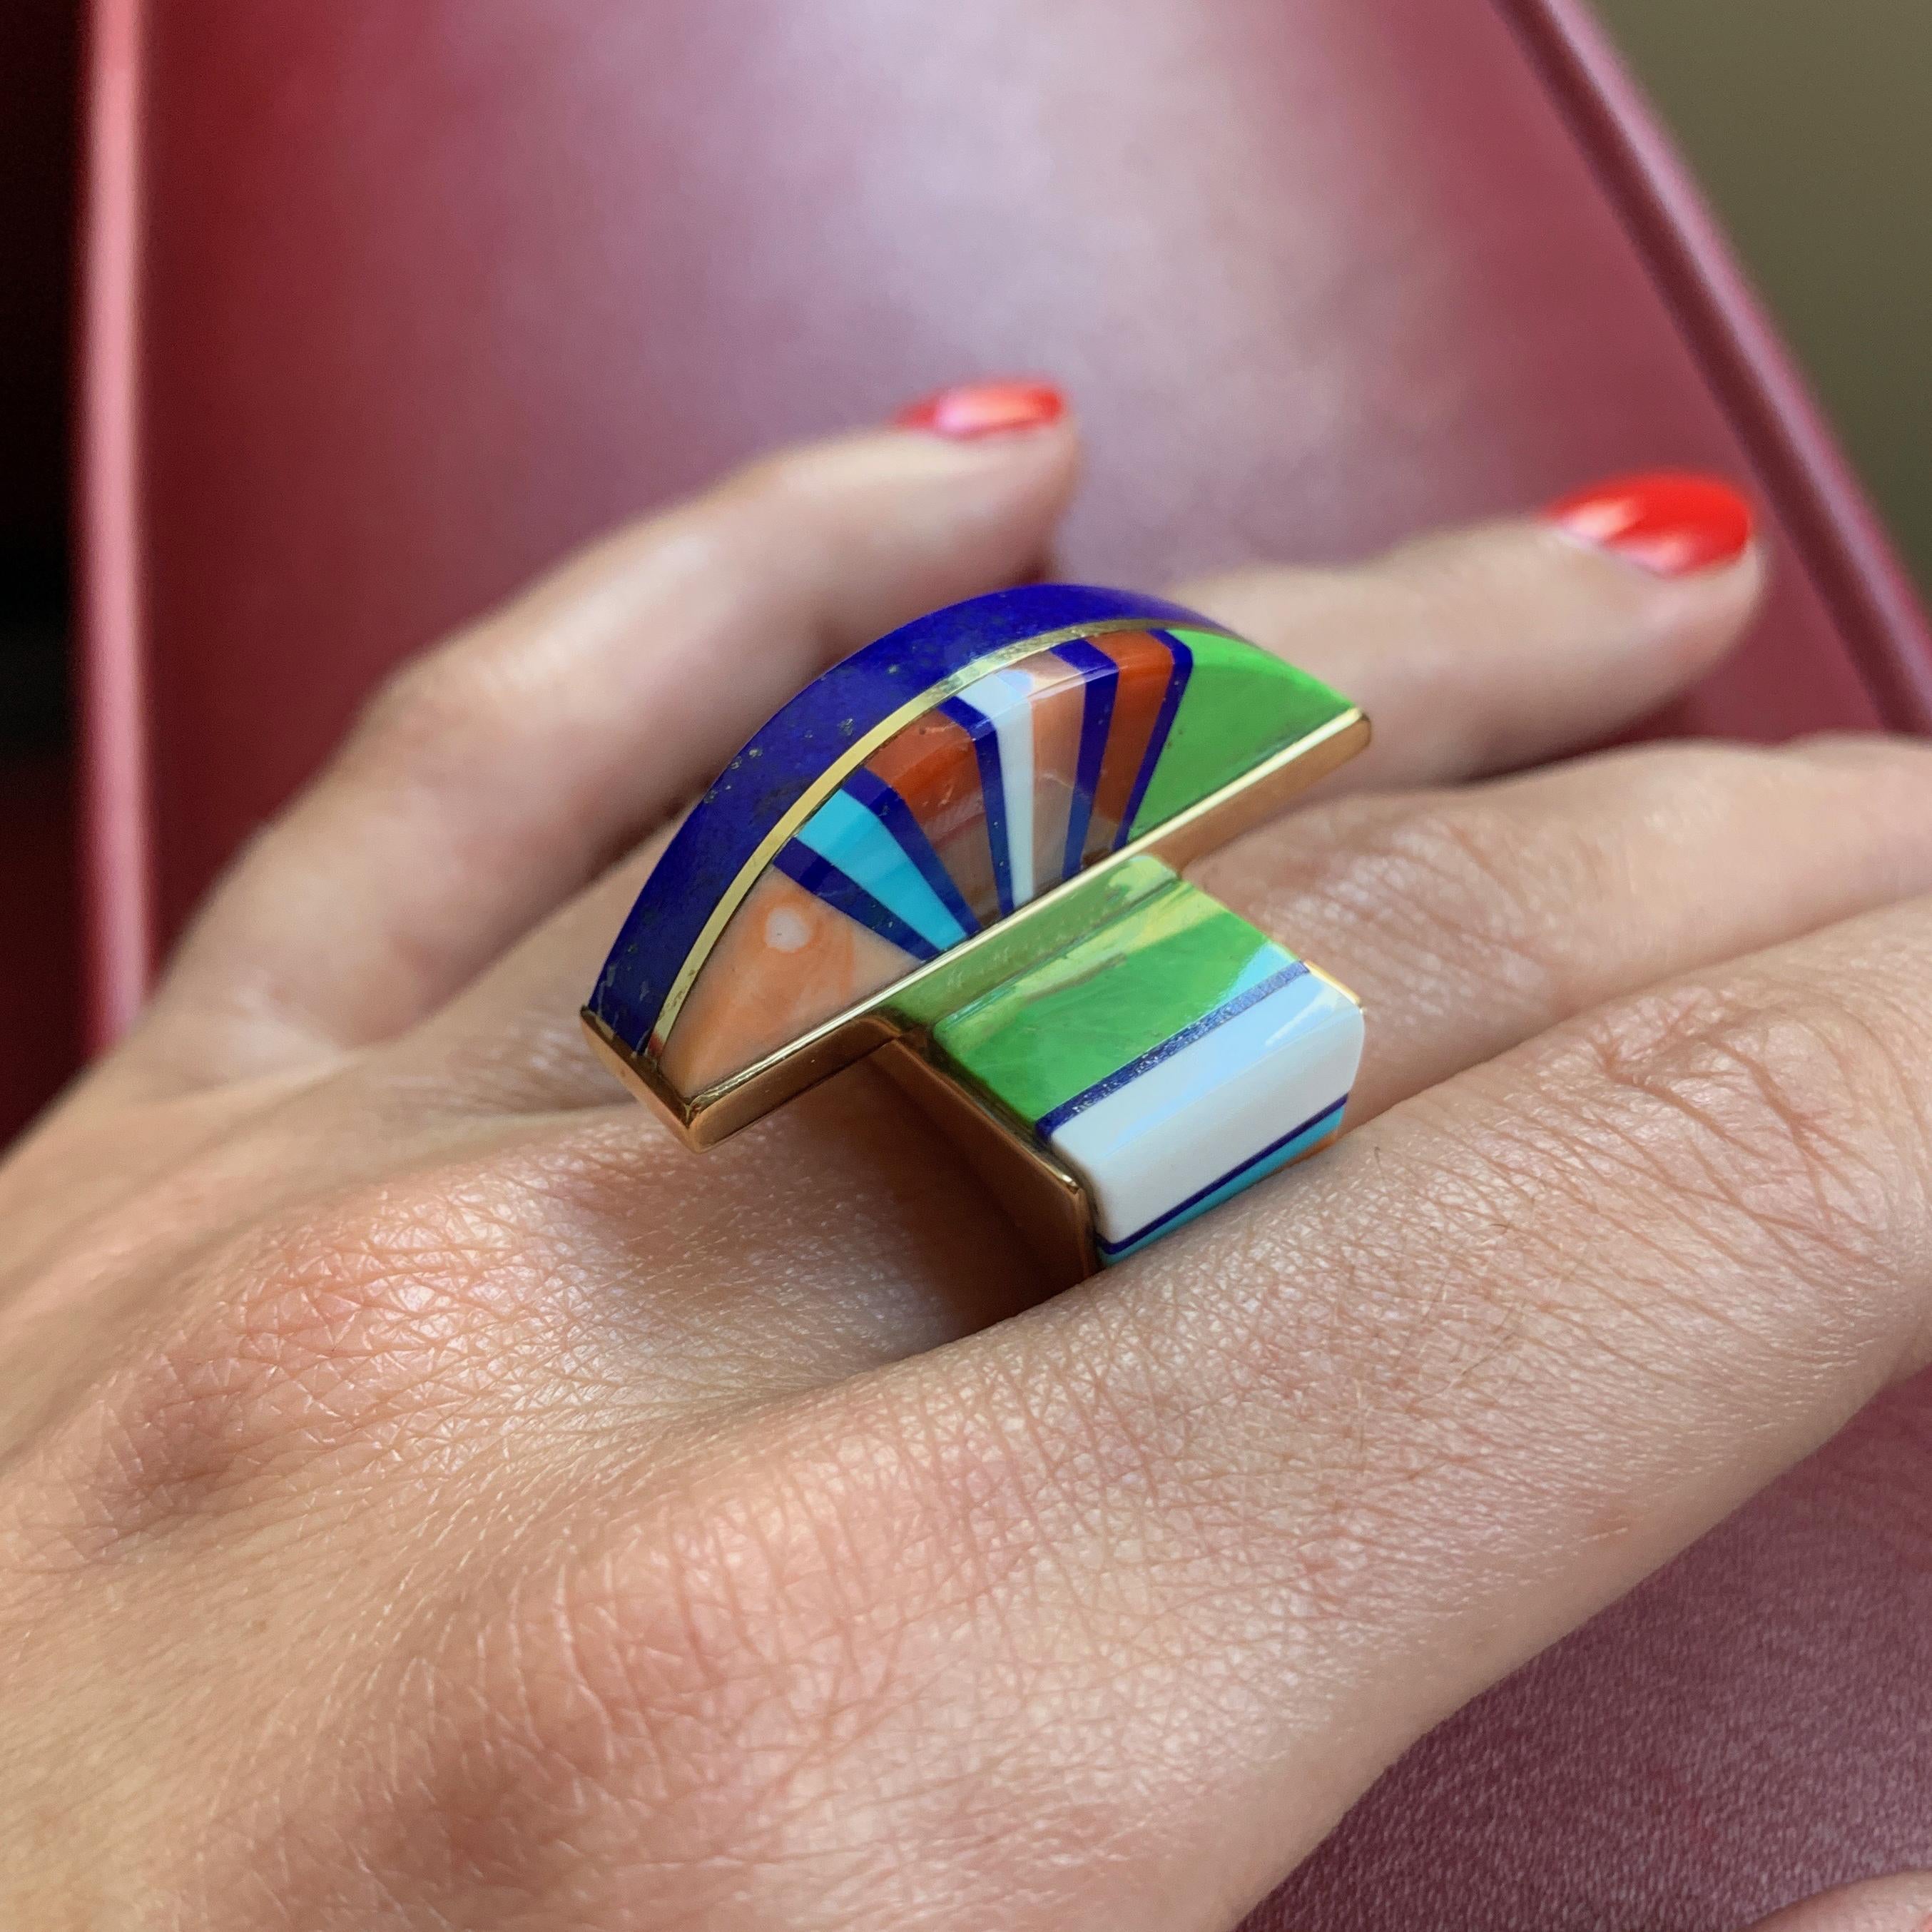 A gaspeite, lapis lazuli, opal, coral, turquoise, and 18-karat gold ring by superstar jeweler Jesse Monongya, made circa 2017. Monongya is an award-winning Navajo/Hopi jeweler known for his superb color combinations and contemporary interpretations